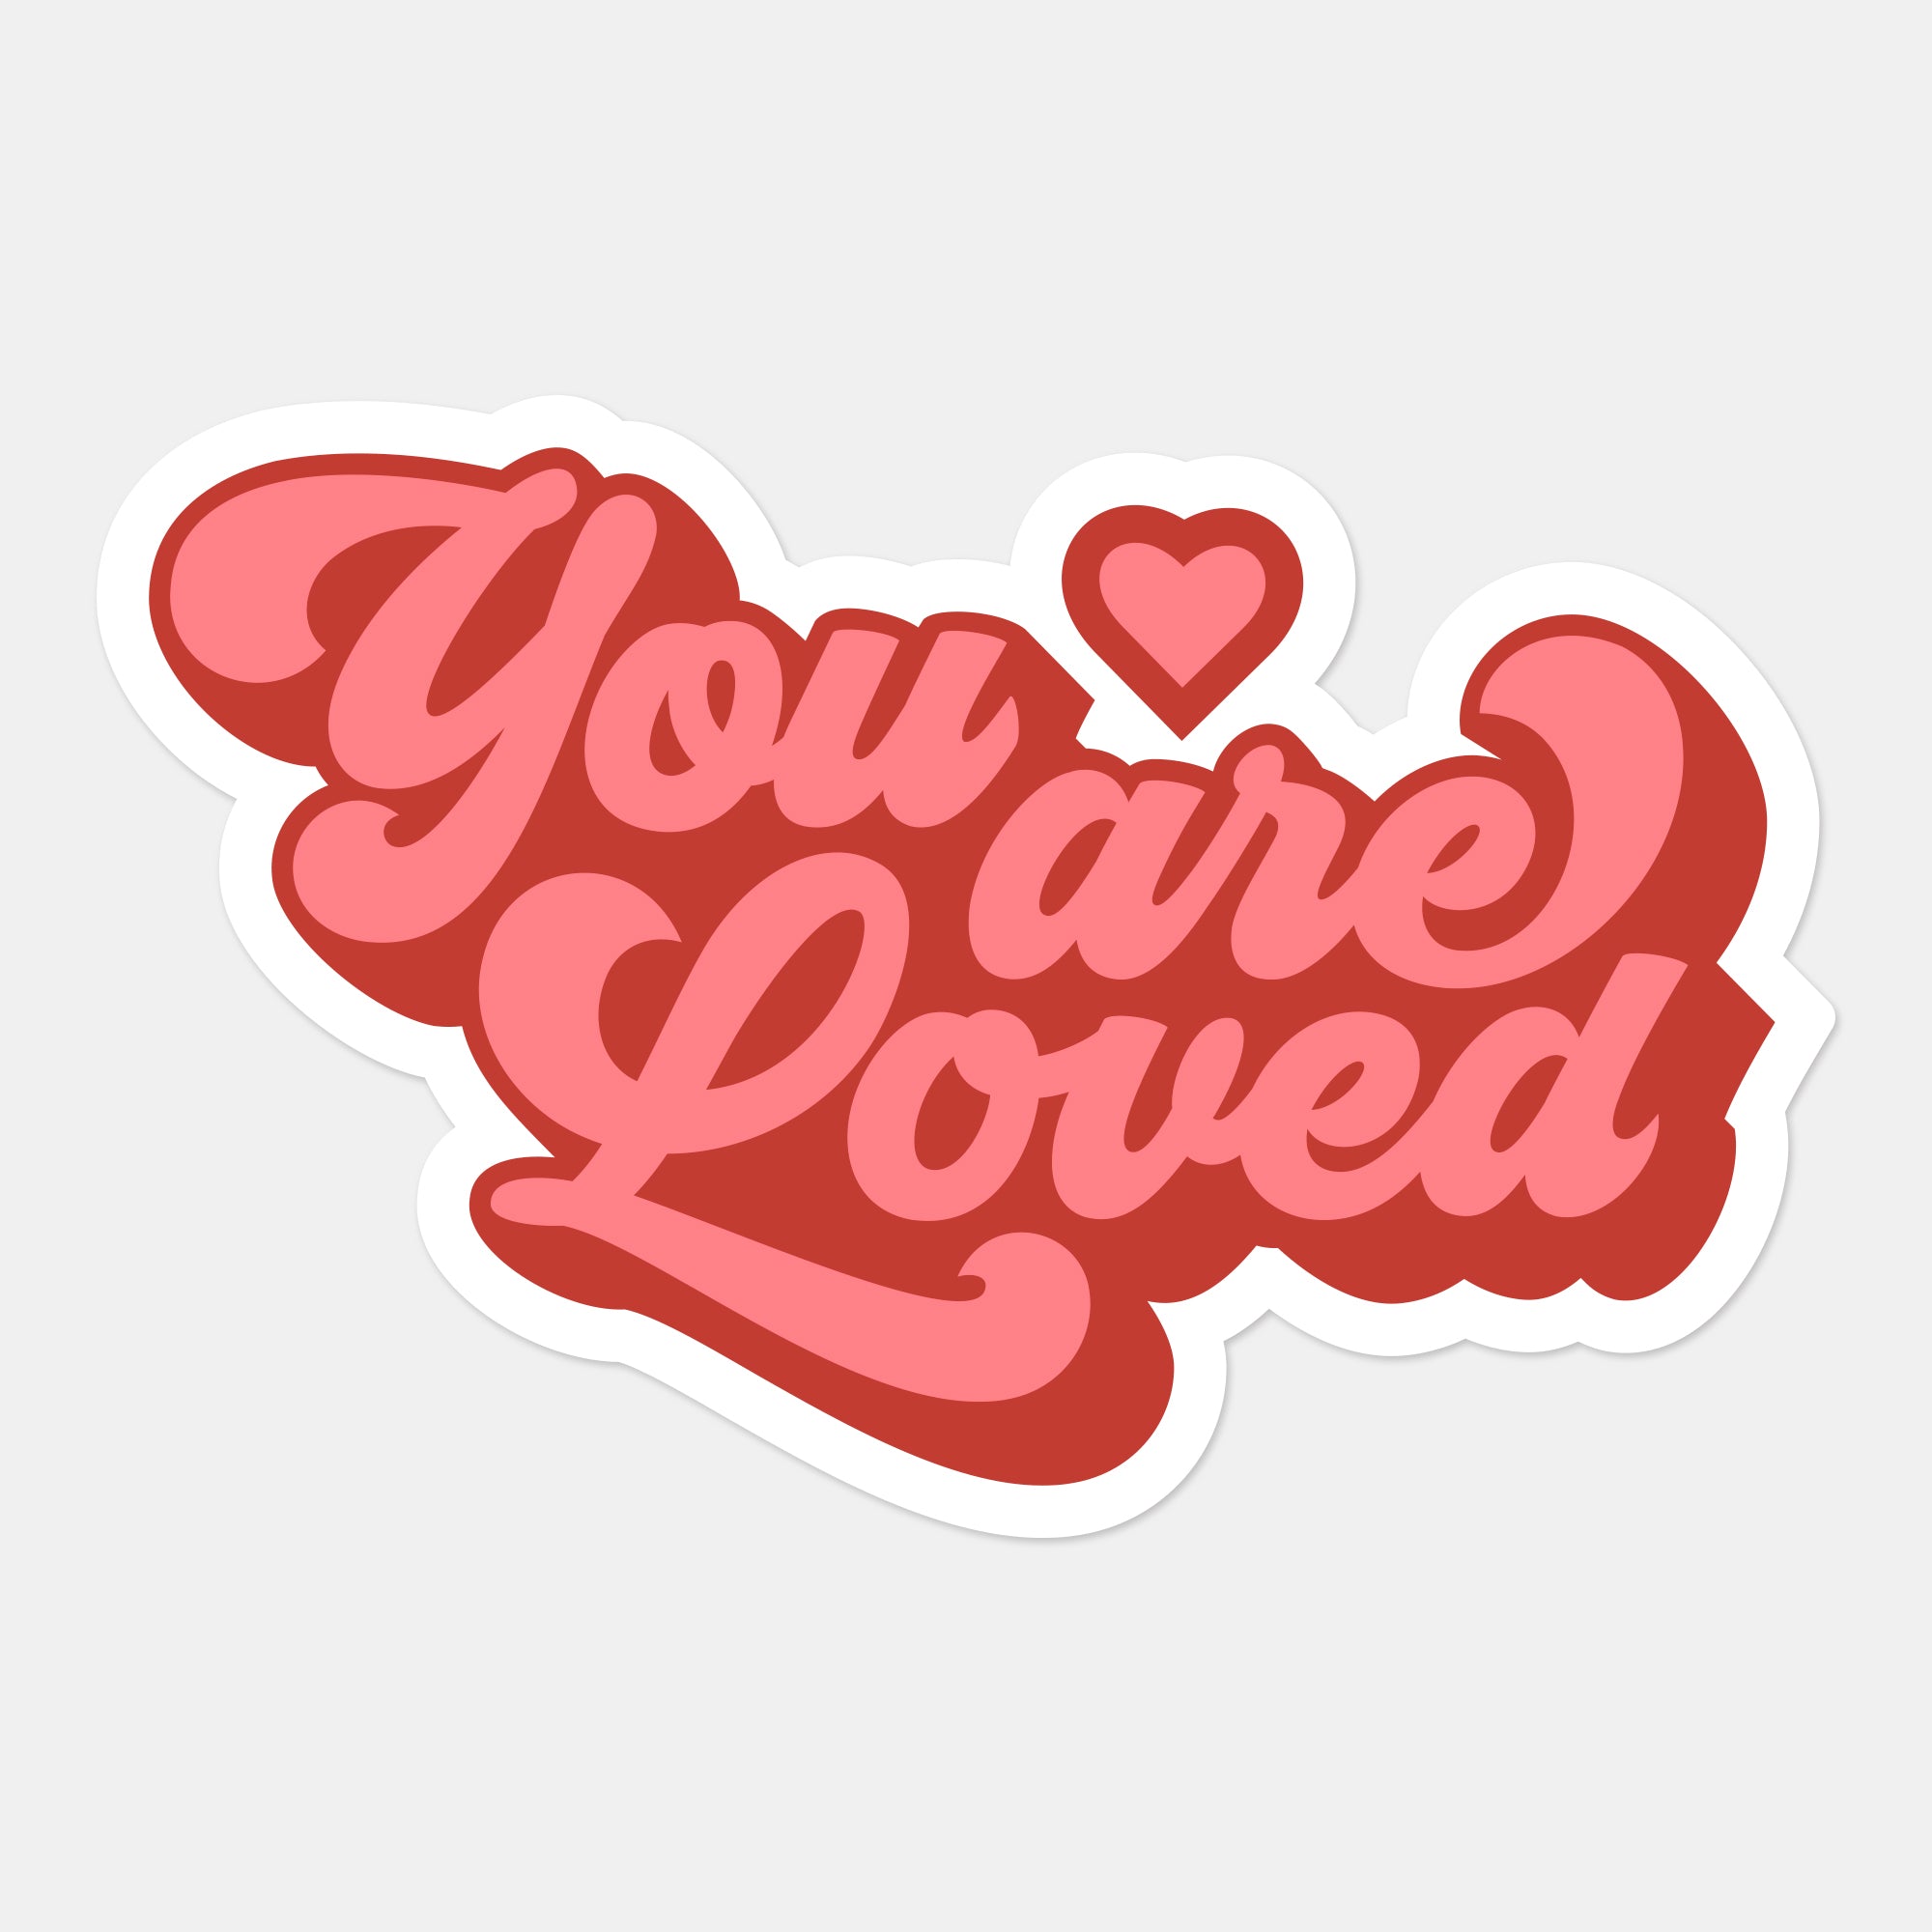 You Are Loved Sticker Card